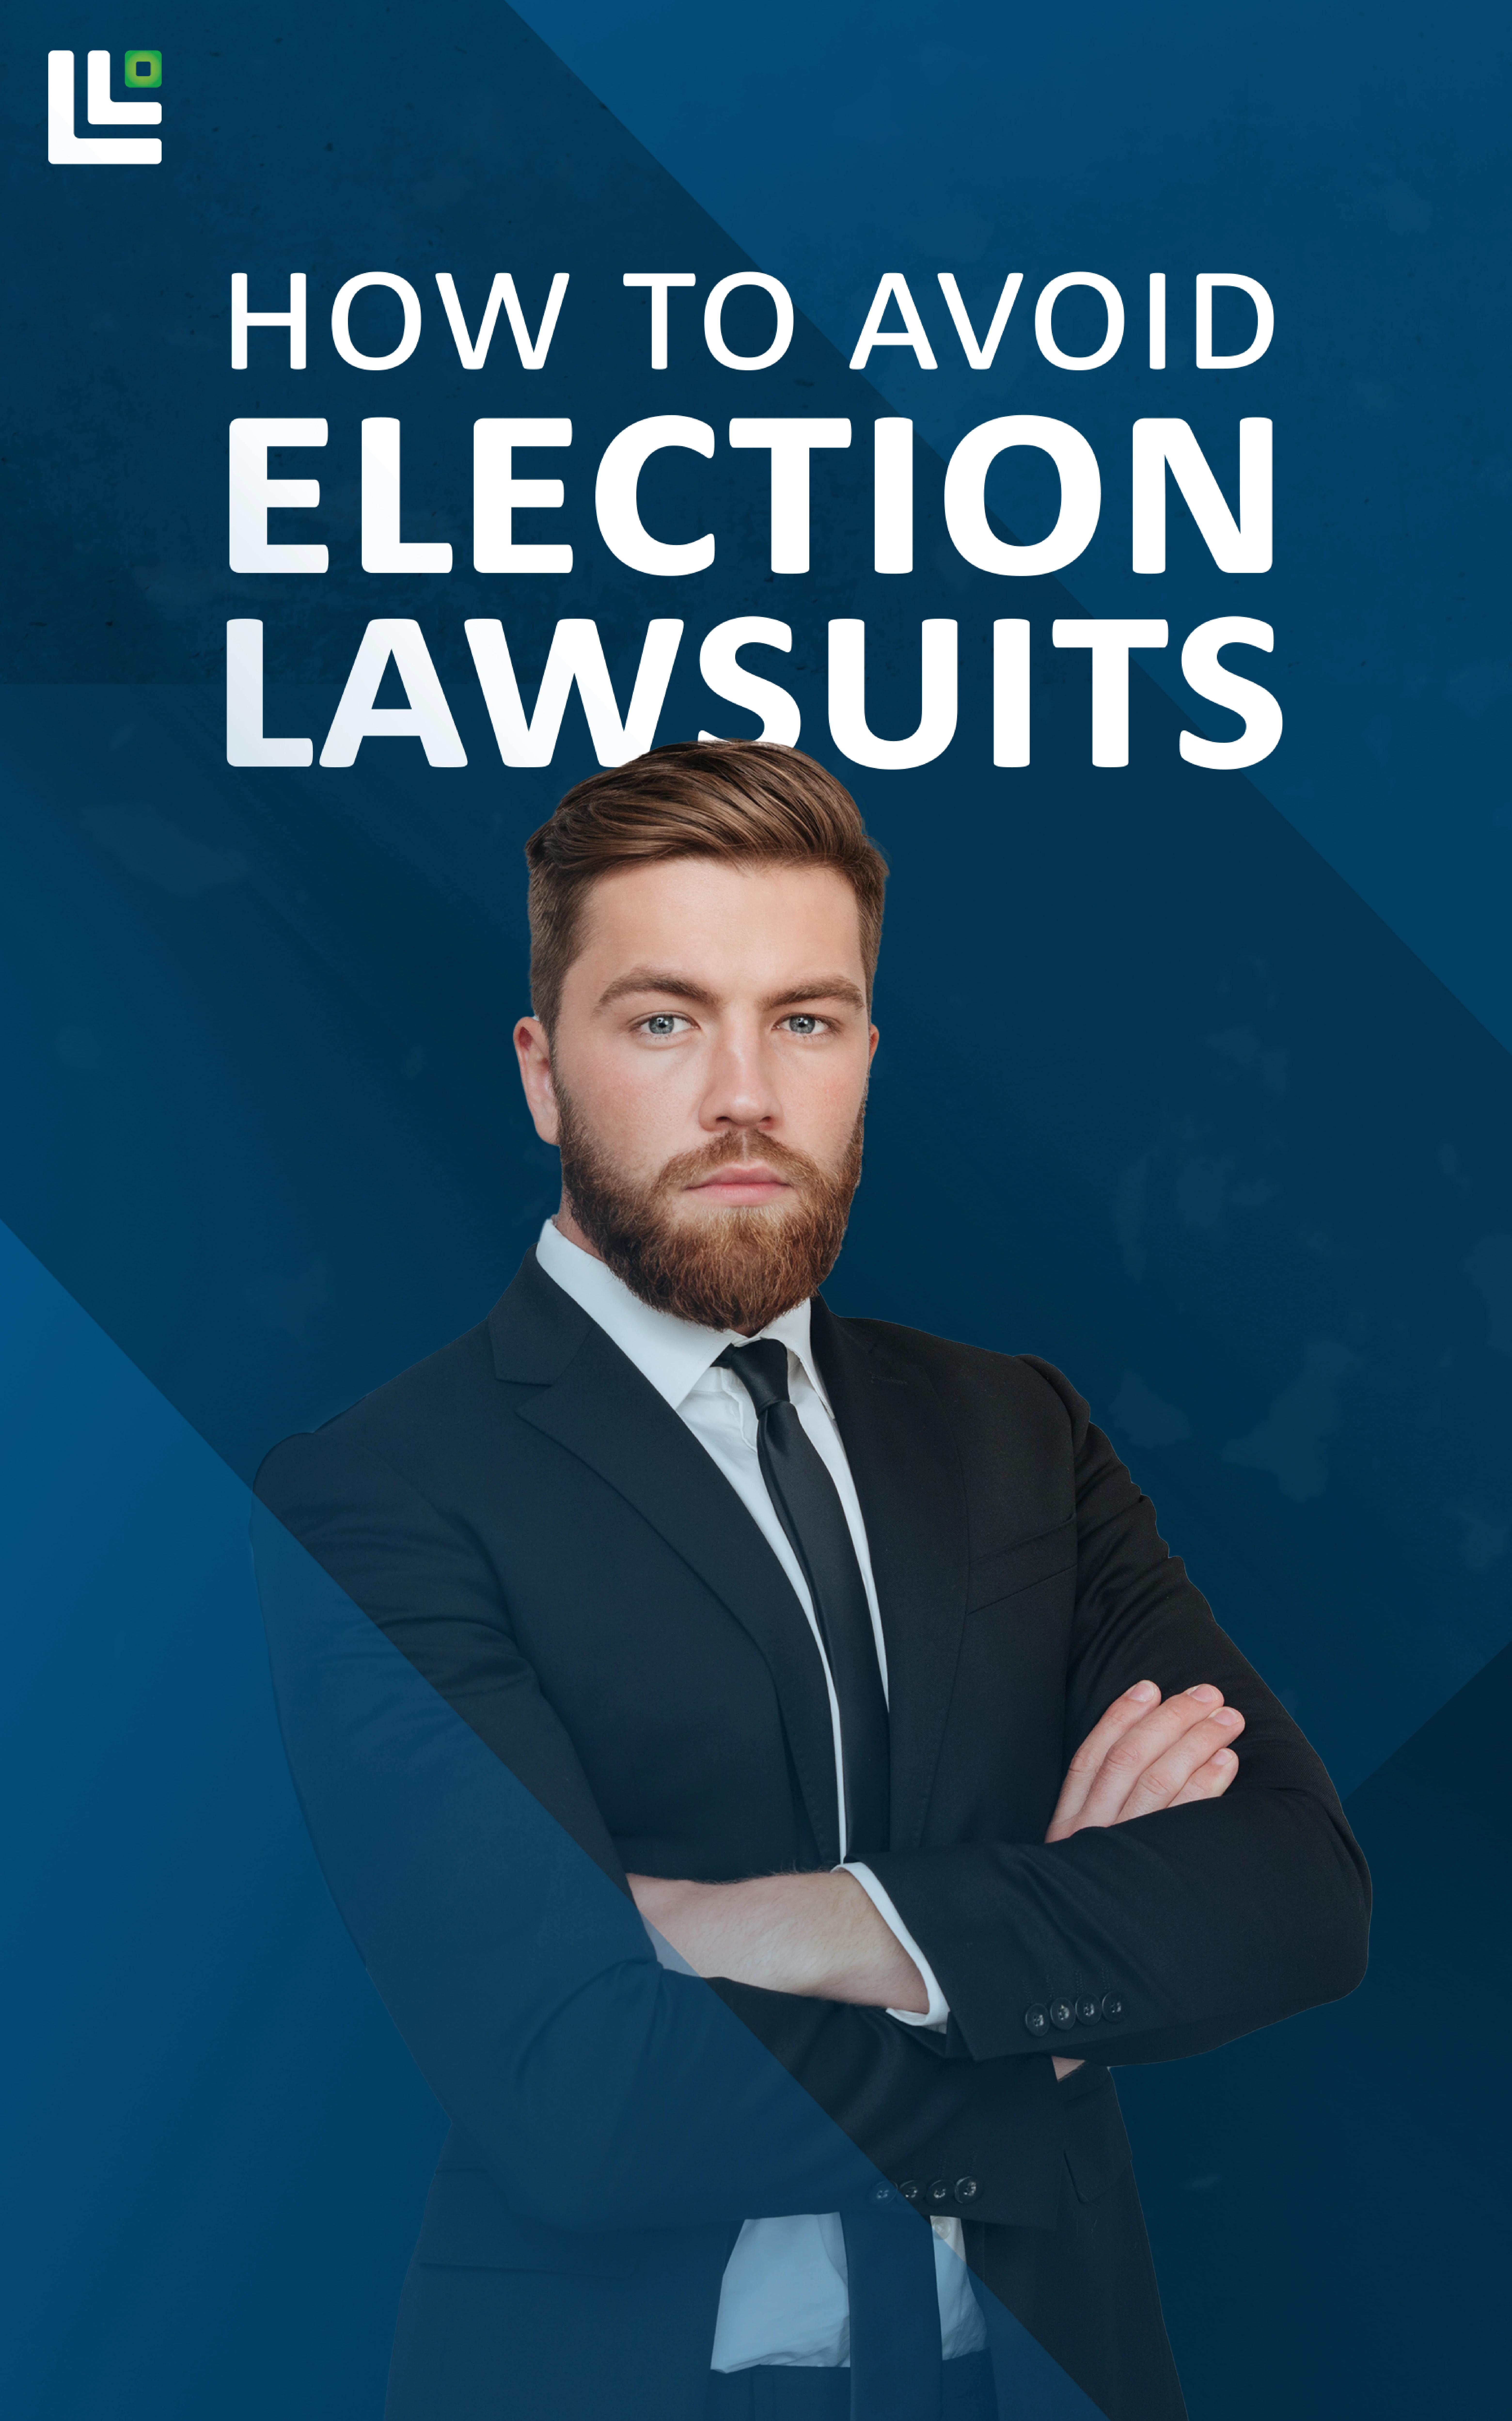 How to Avoid Election Lawsuits